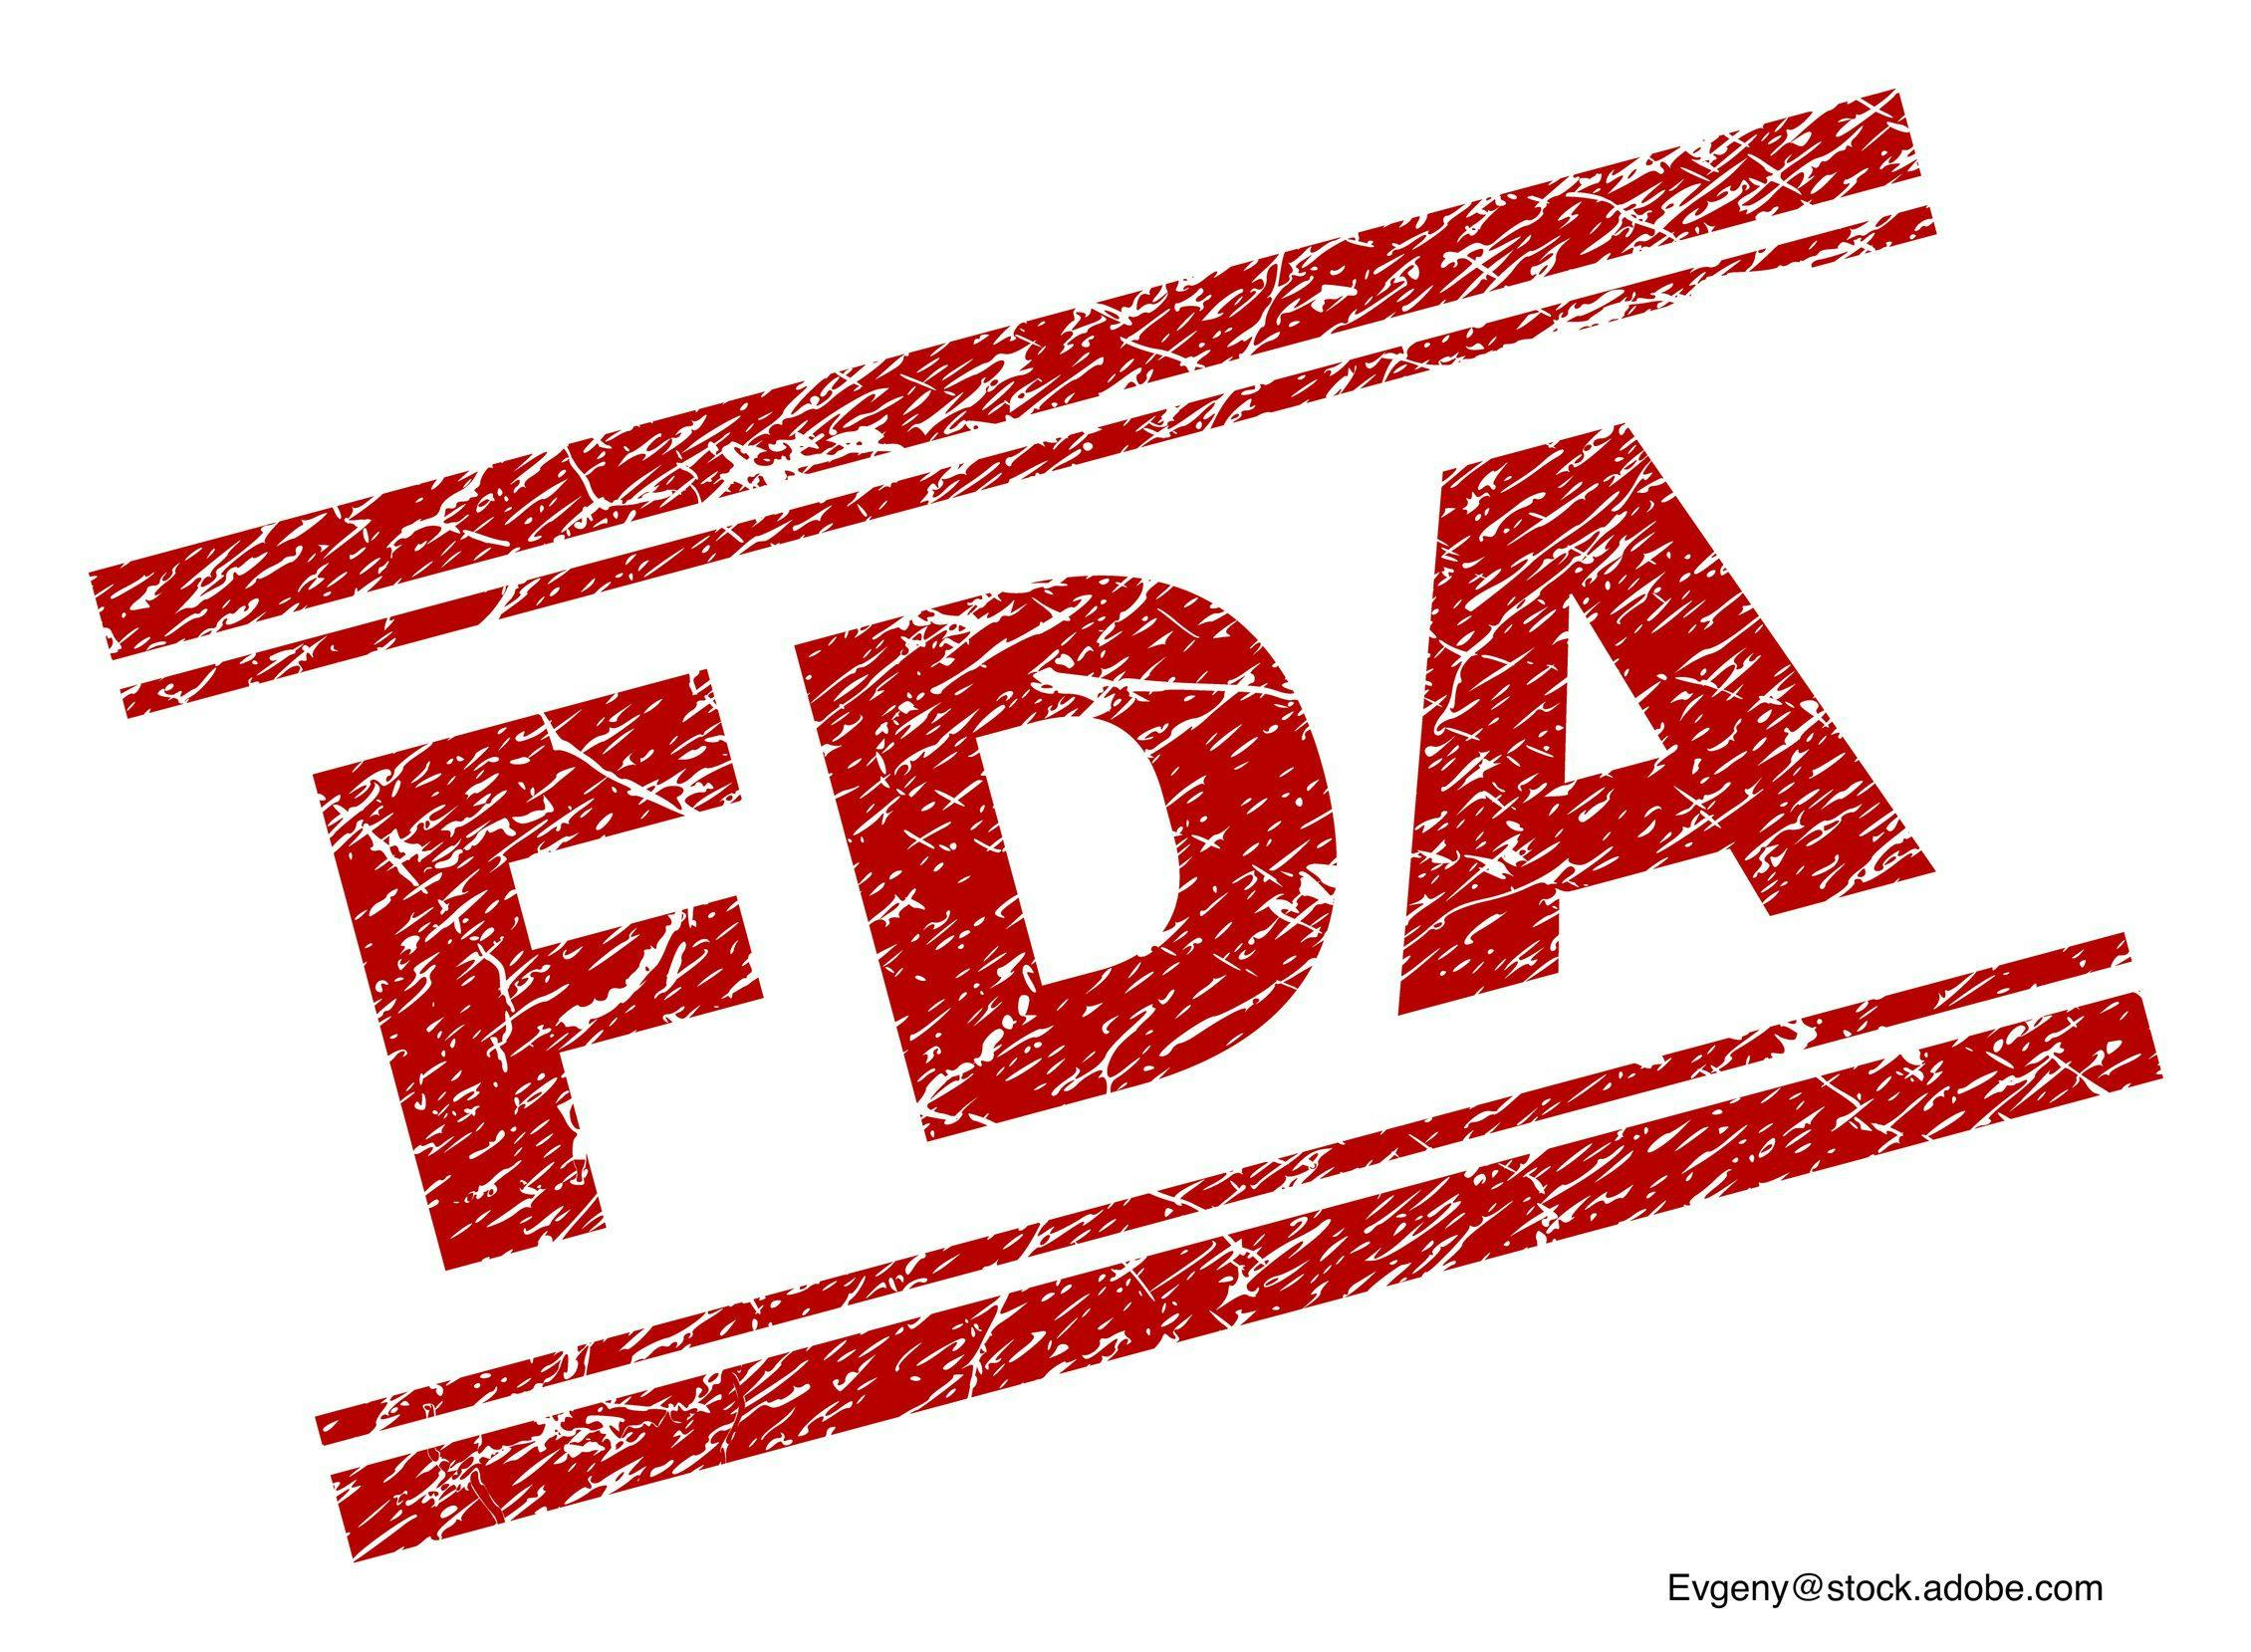 FDA grants Priority Review to Dupixent® for kids 6 months to 5 years